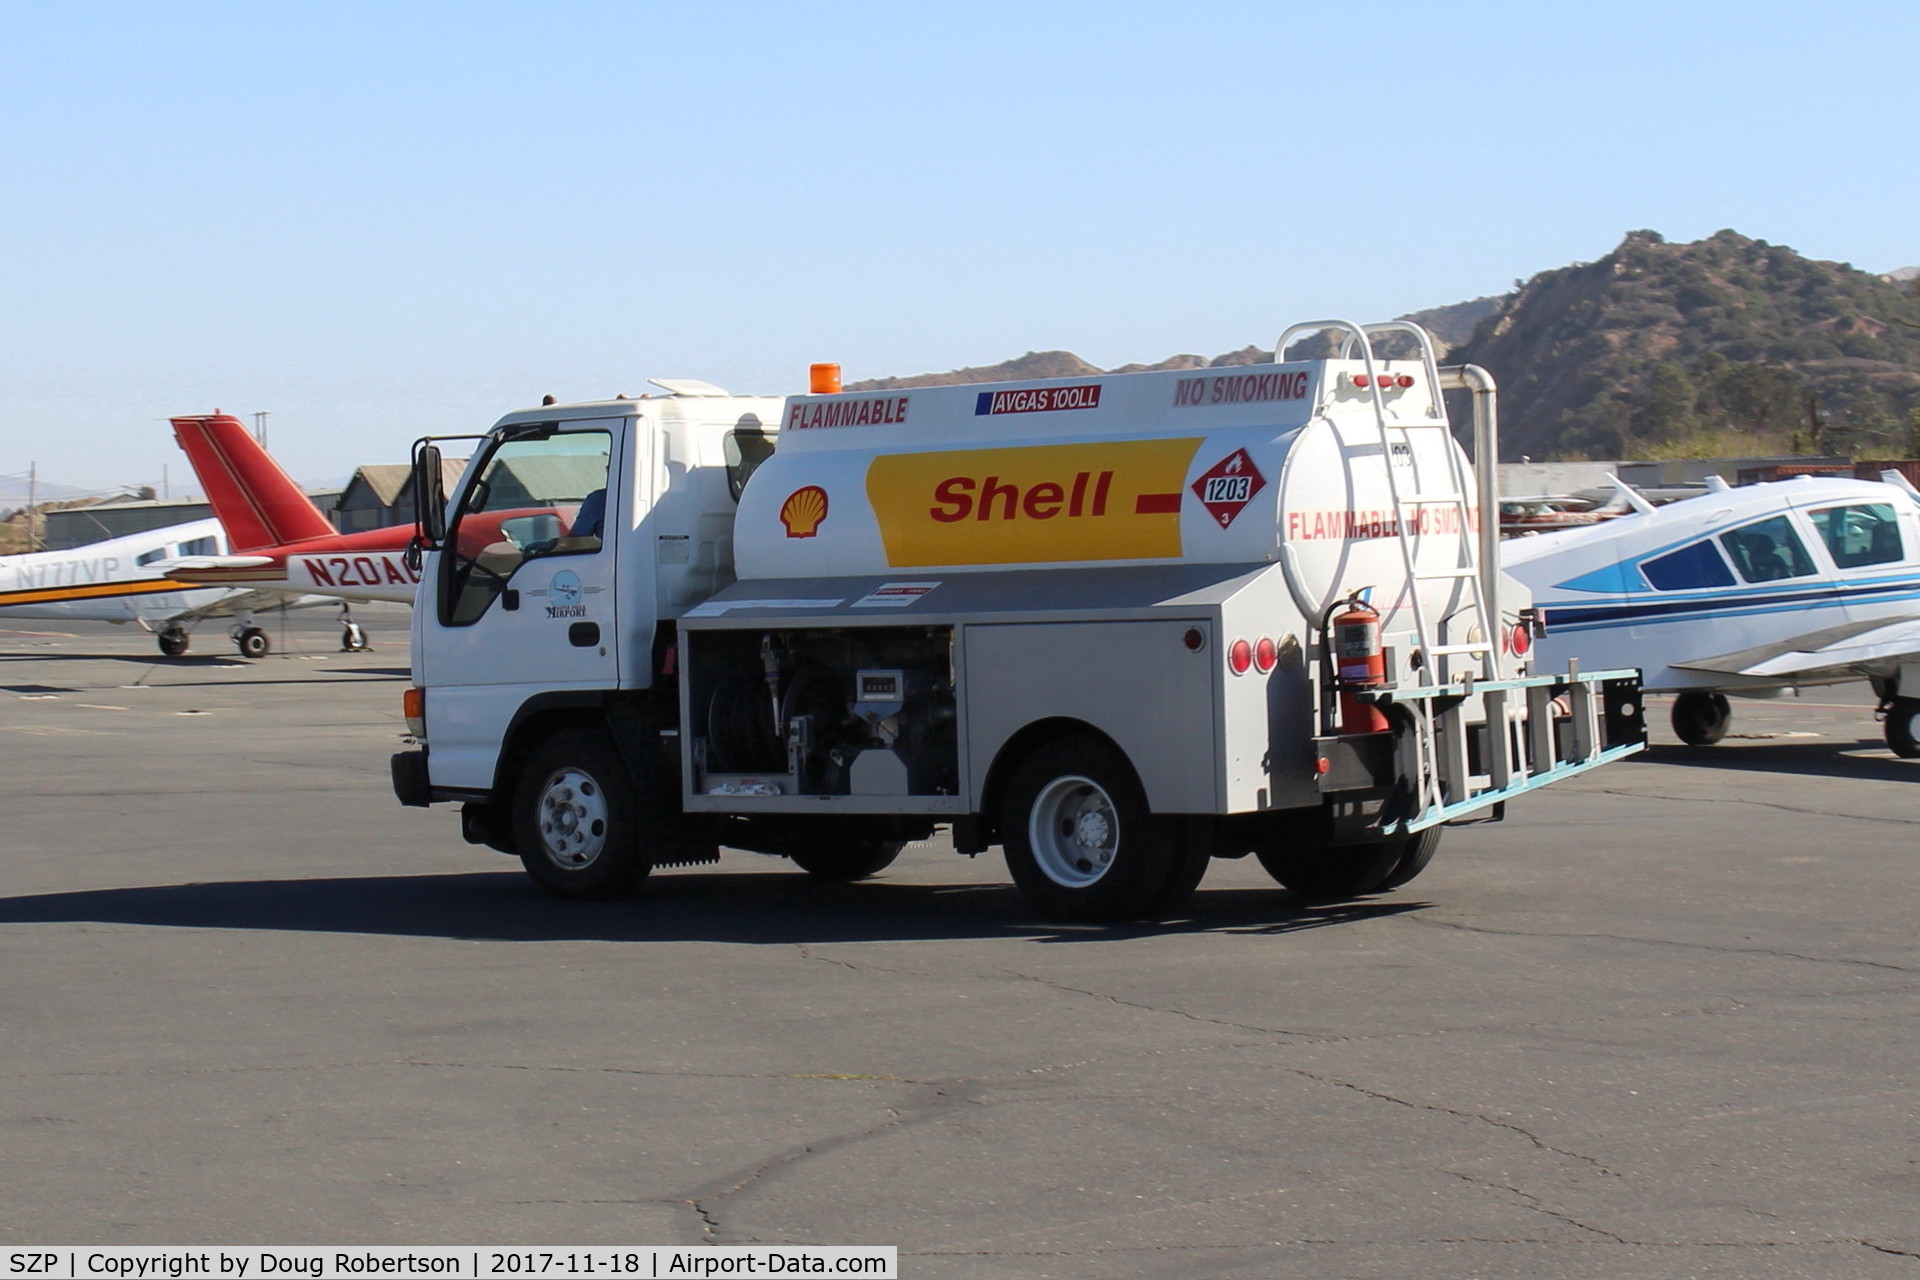 Santa Paula Airport (SZP) - Shell 100LL Fuel Truck on way to service helicopter N454WT at SZP Helipad.